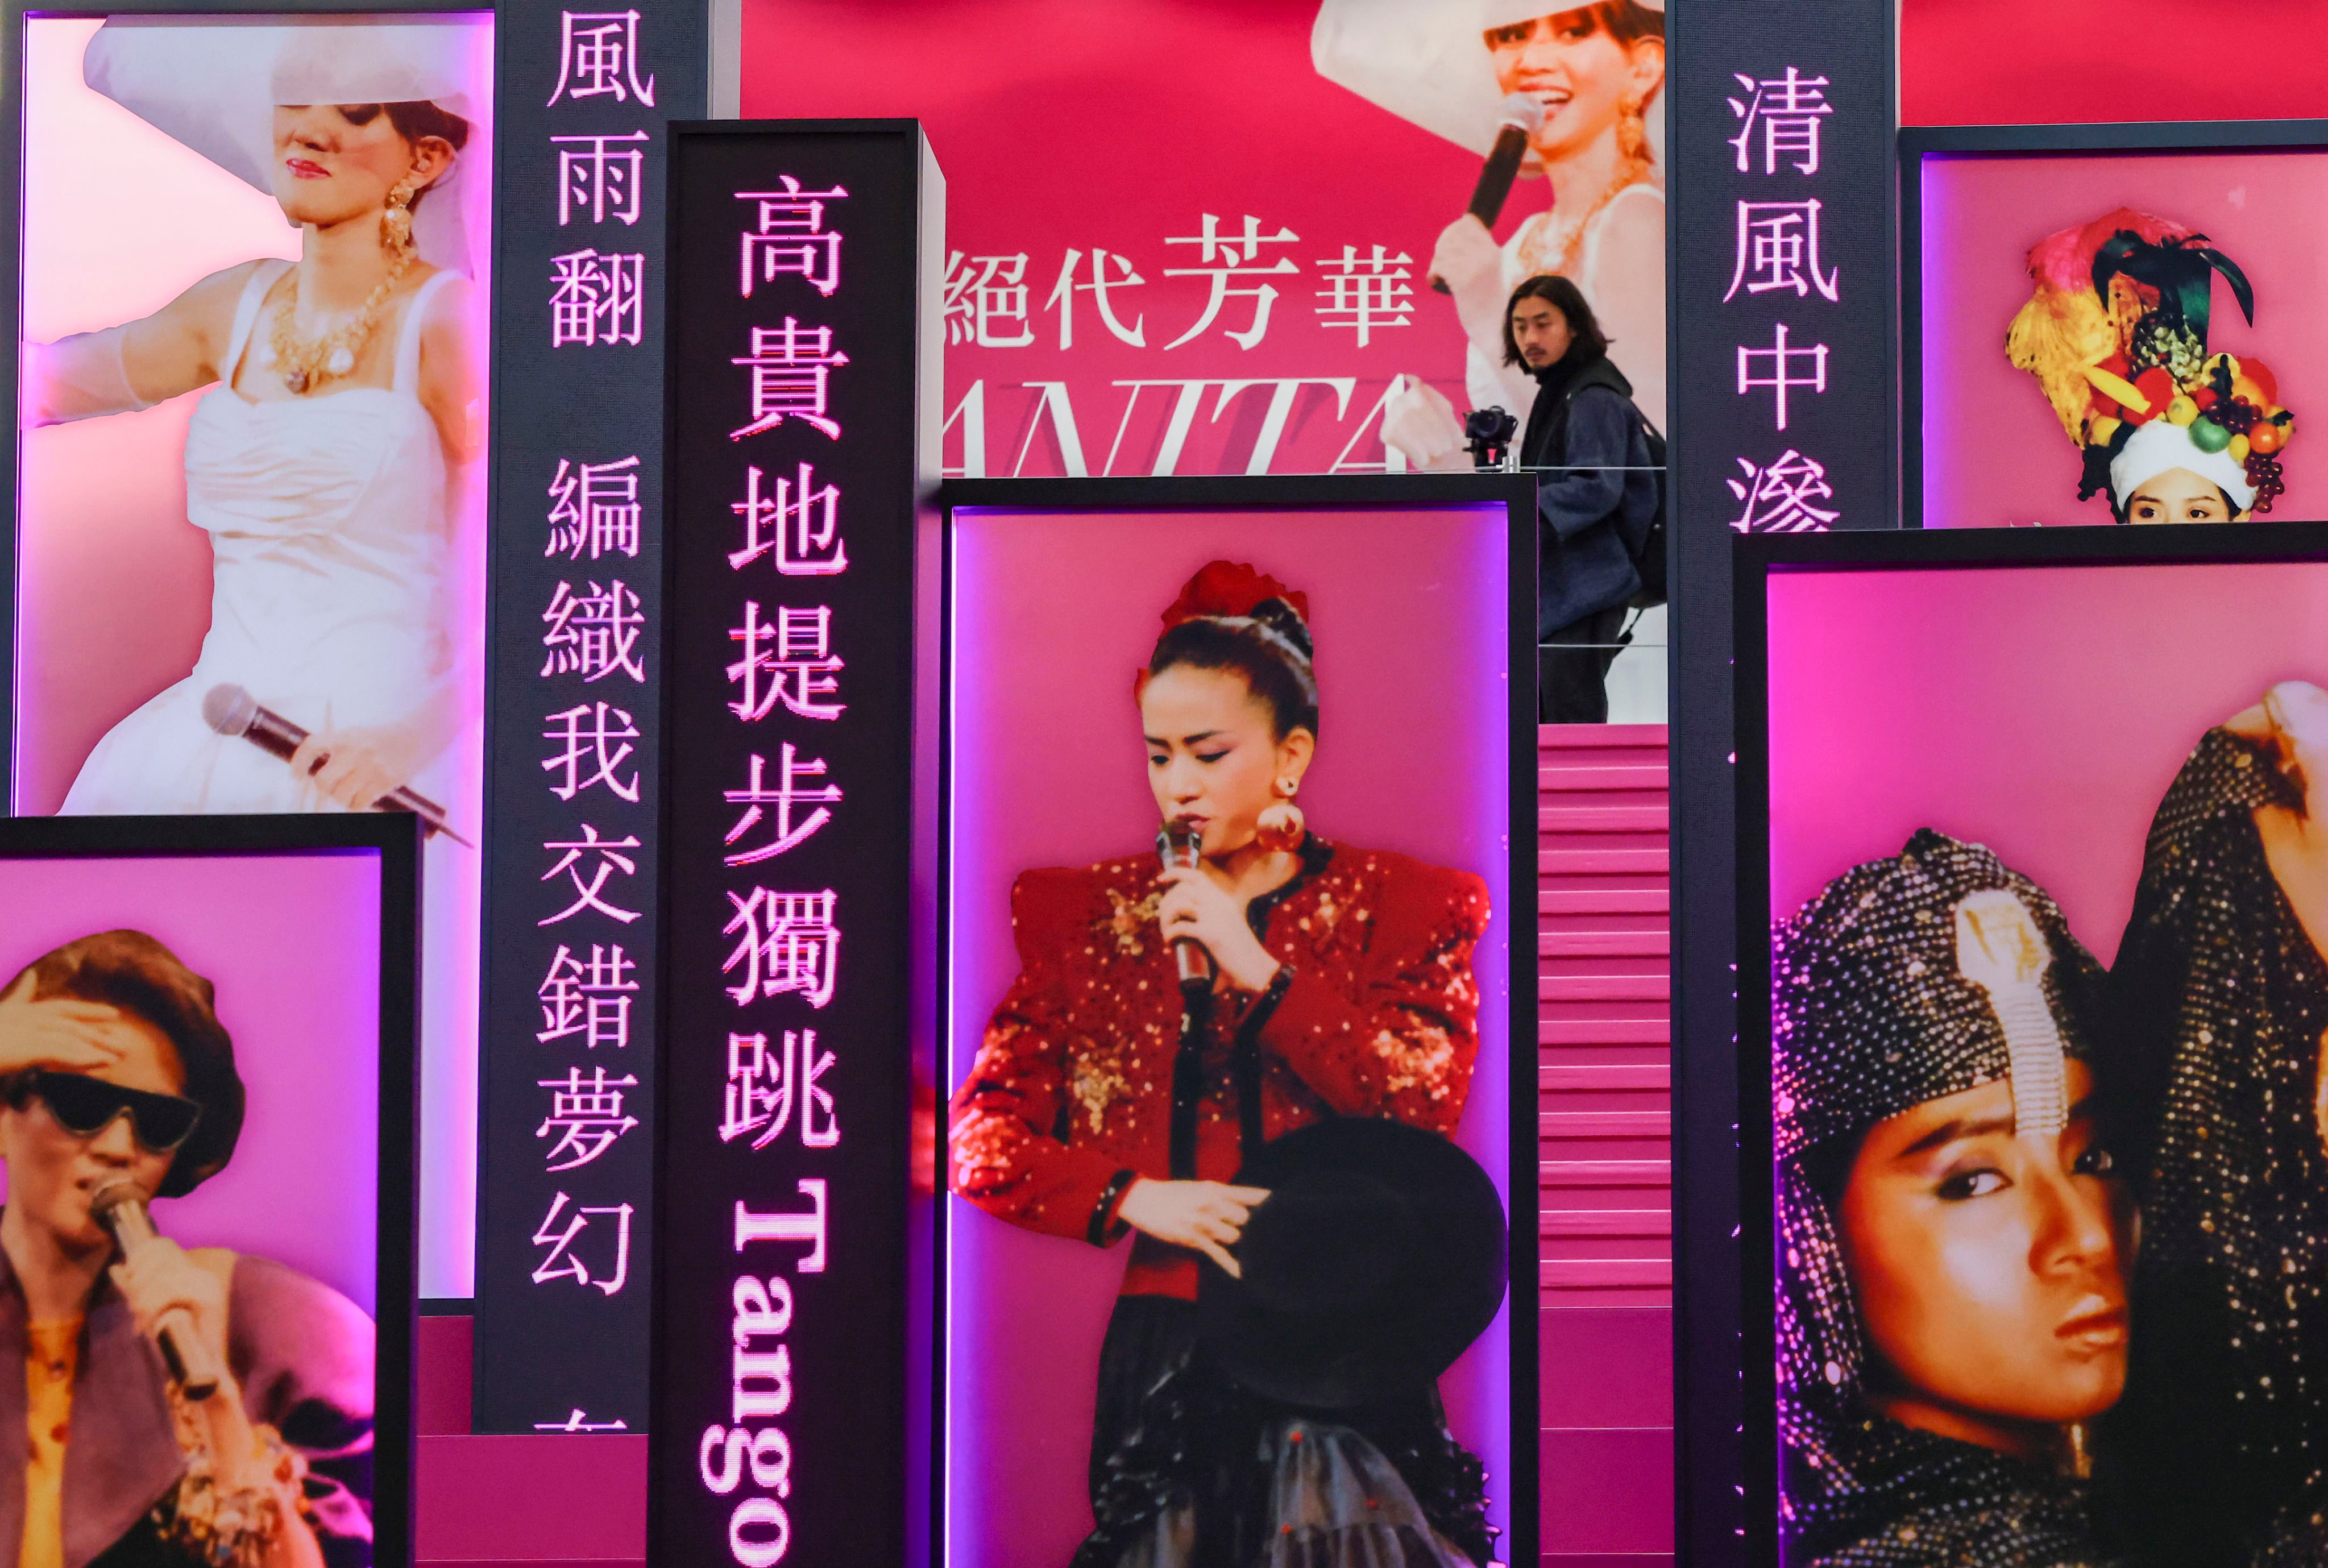 The Anita Mui exhibition at the Hong Kong Heritage Museum includes record covers, stage costumes, movie posters and film stills. Photo: Dickson Lee